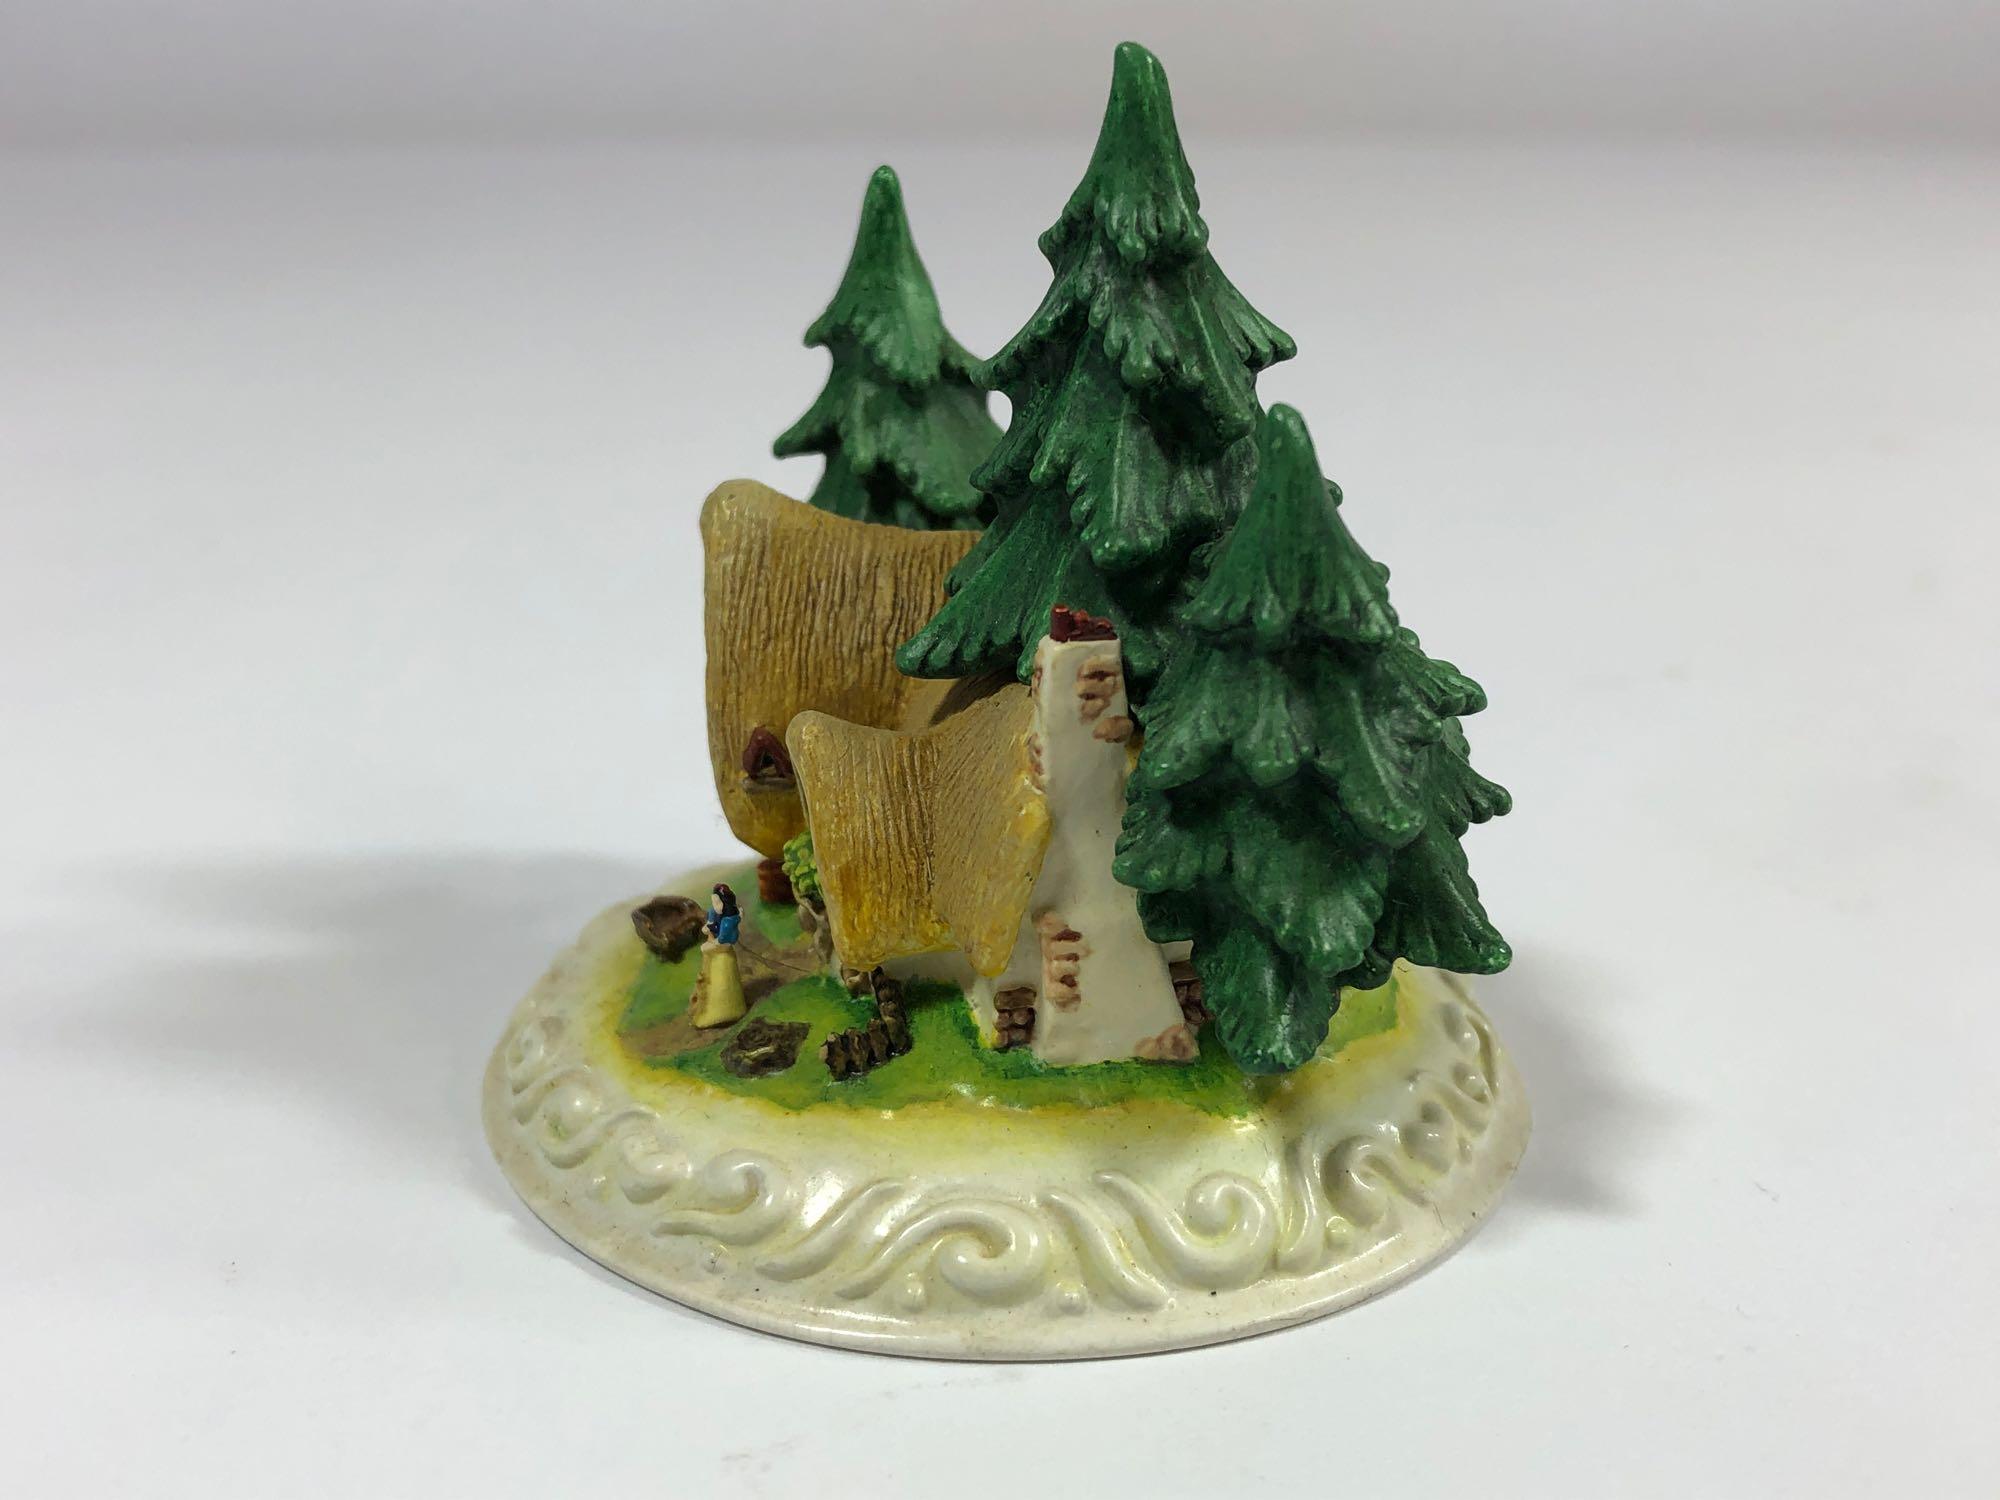 Snow White Cleaning House SIGNED Limited Edition Sculpture DC4 2000 Disney Showcase Collection